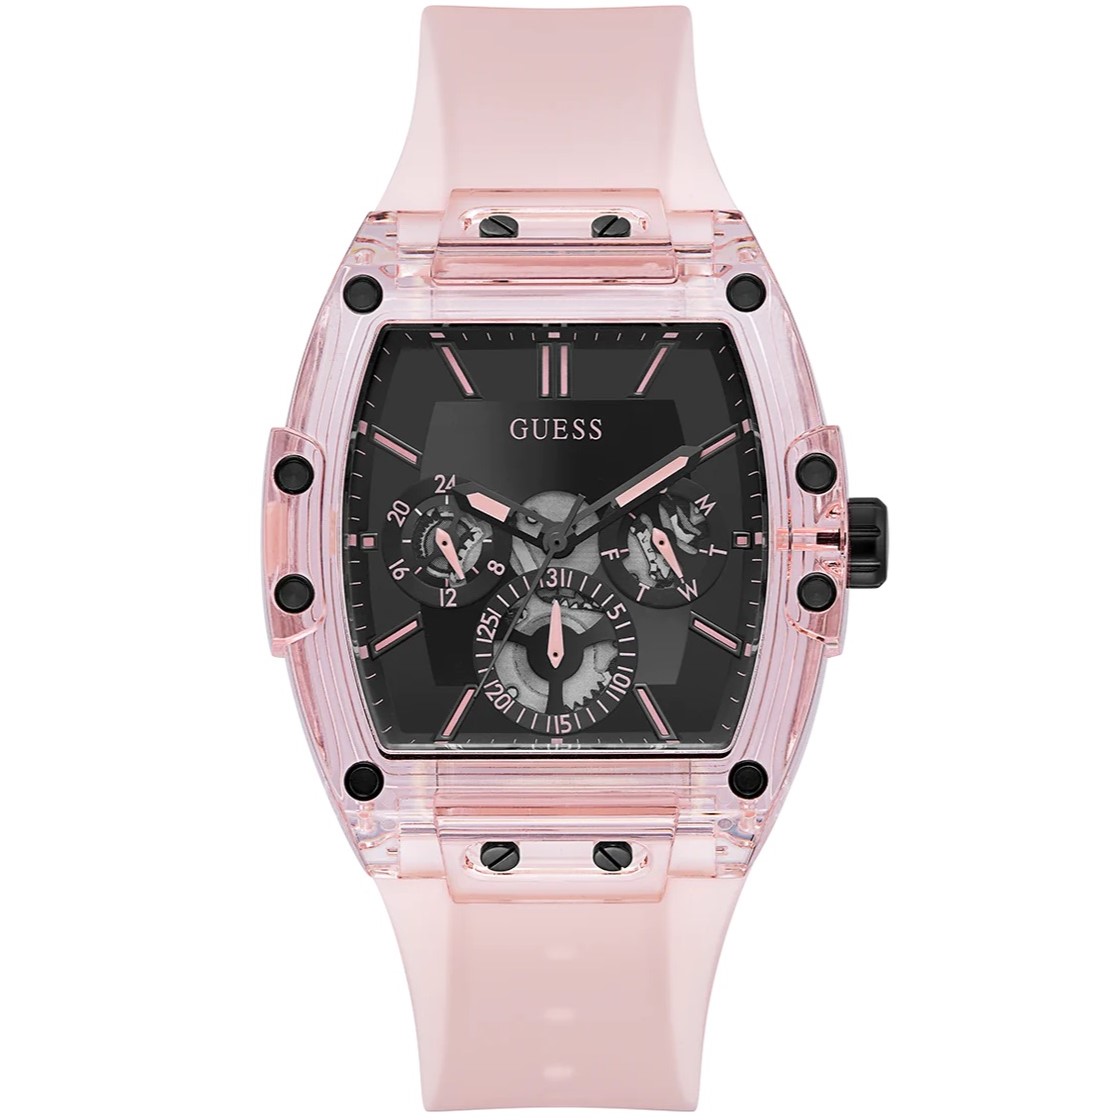 ĐỒNG HỒ ĐEO TAY GUESS PINK MULTIFUNCTION WATCH GW0203G11 6